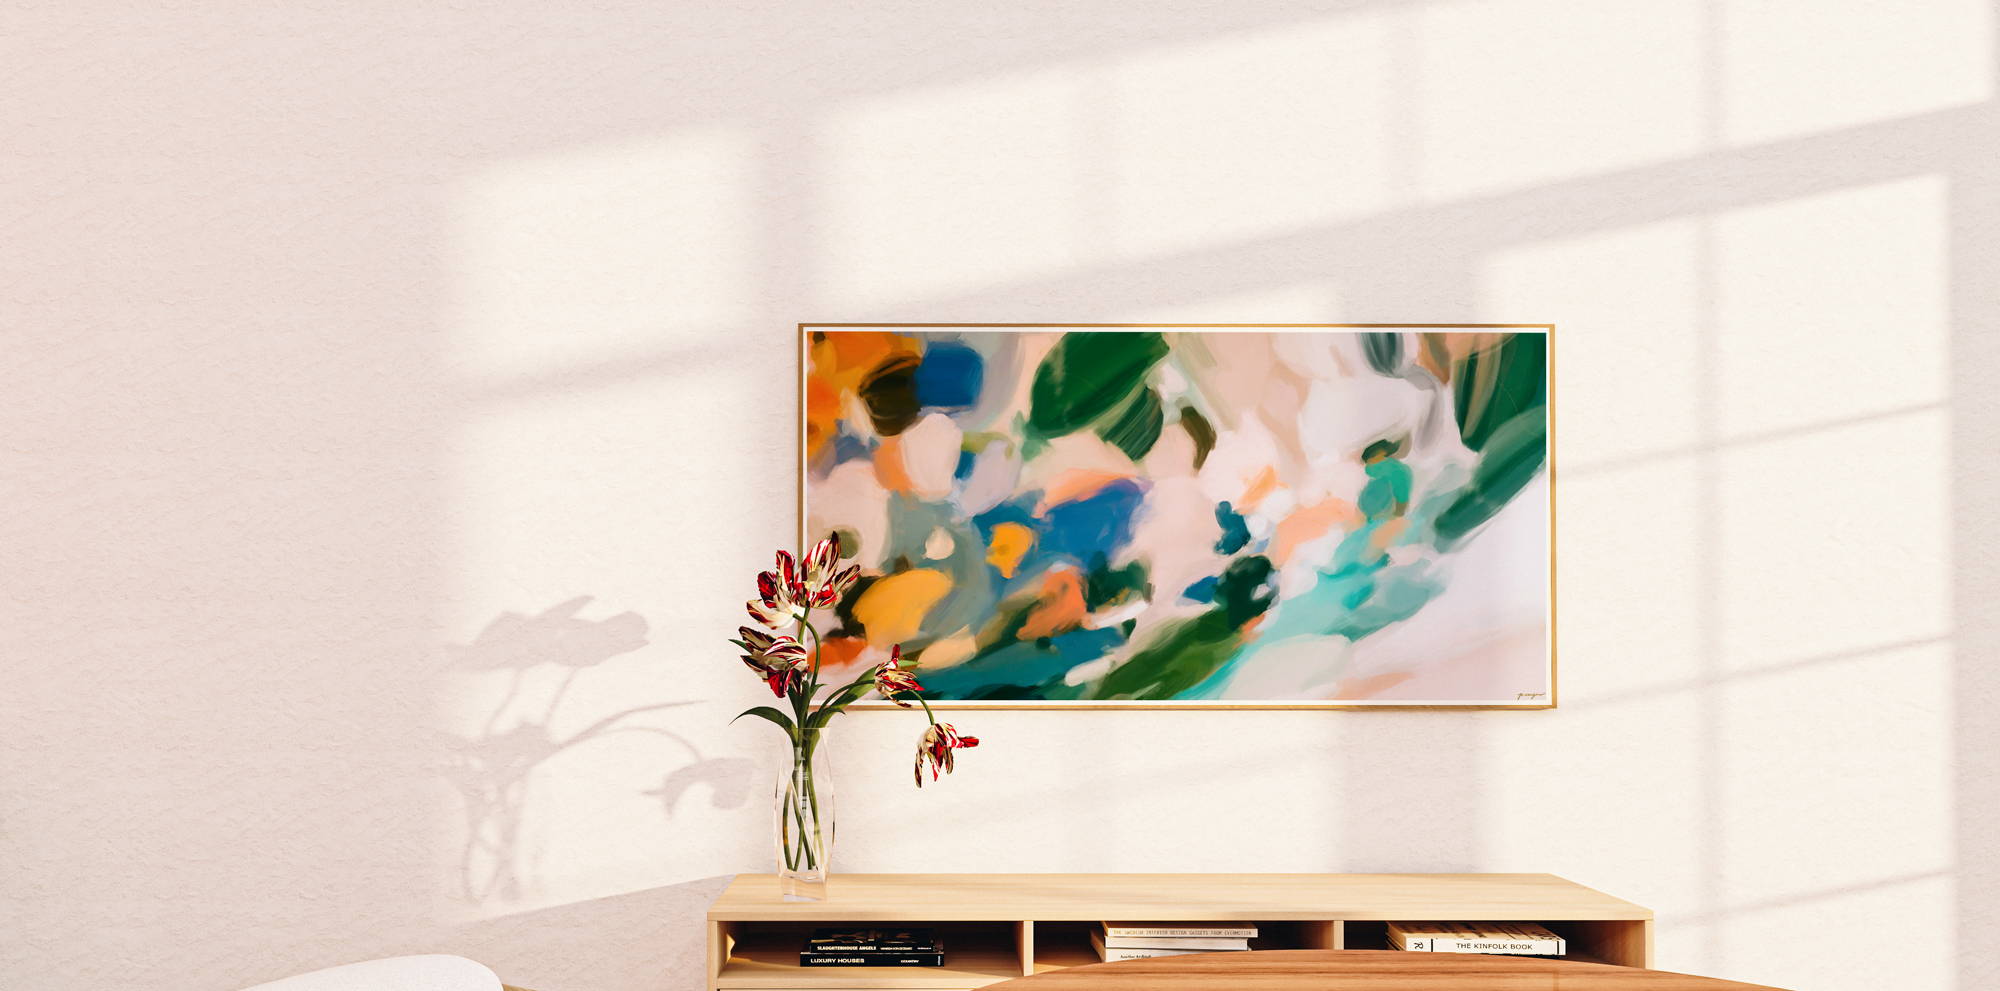 This large scale art adds a pop of color to your neutral dining room